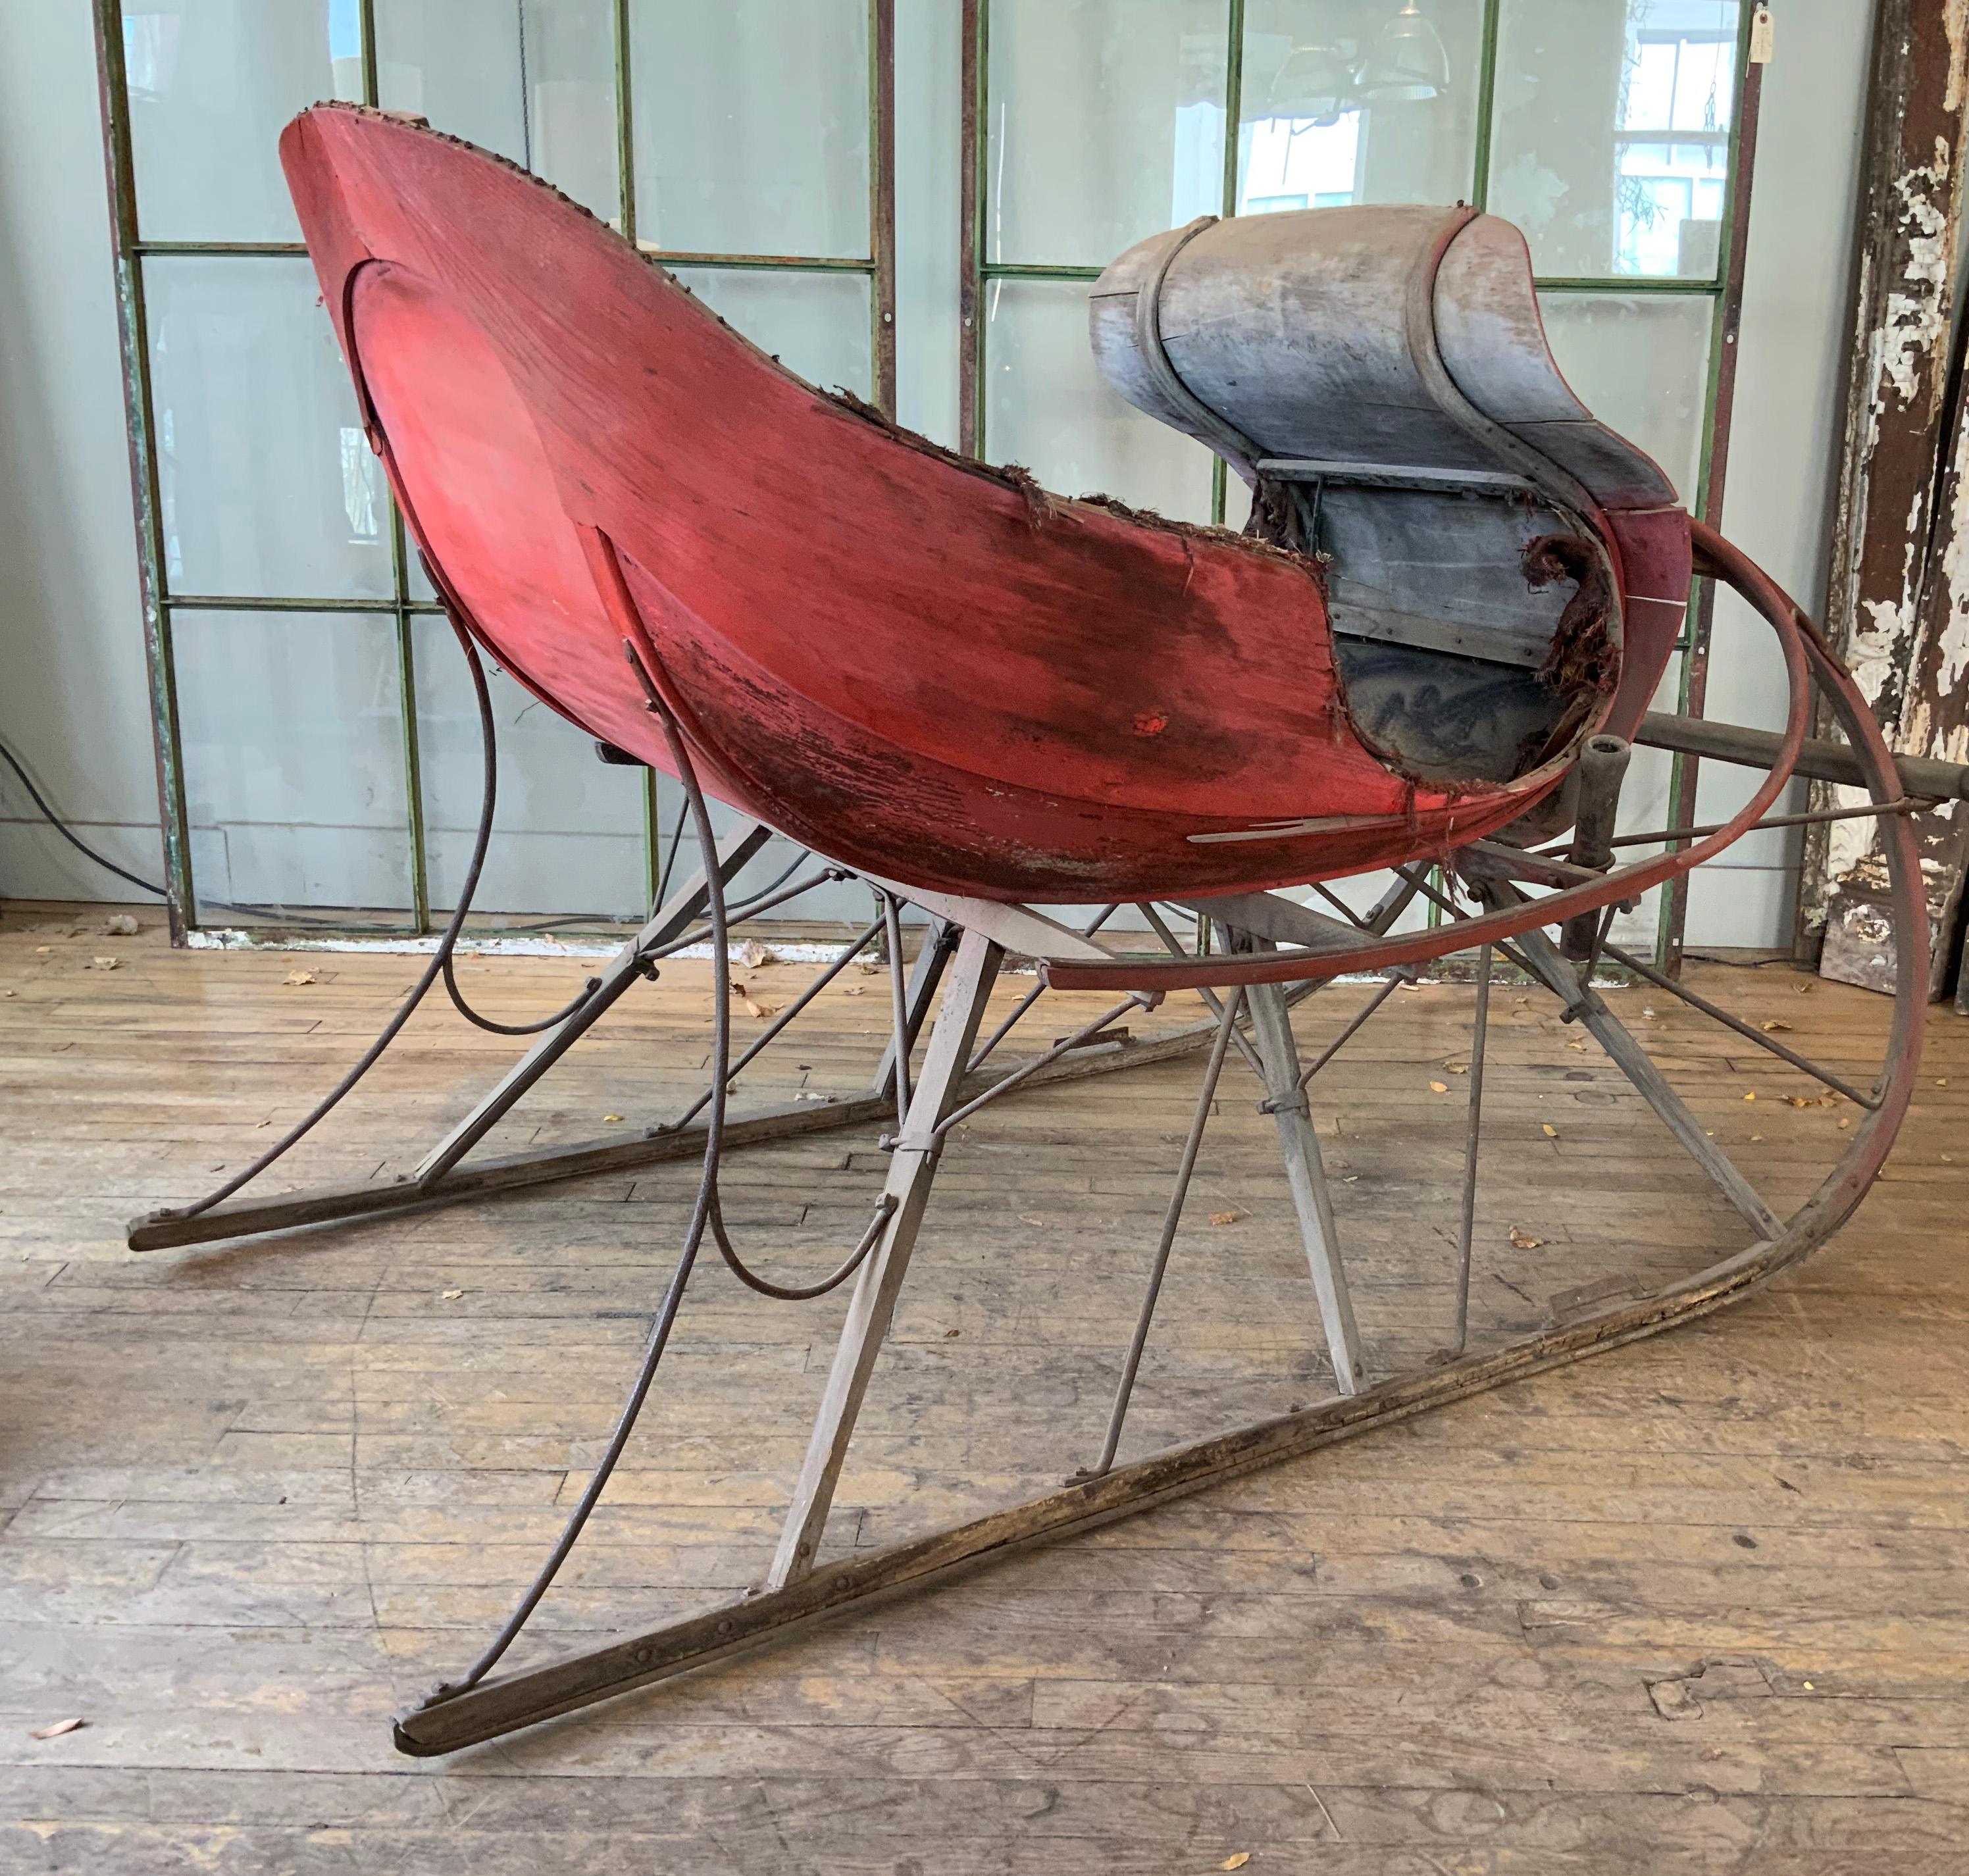 A totally charming antique late 19th century horse-drawn sleigh, in original red painted finish. beautifully sculptural, and despite some loss to the carriage as pictured, it is stable, a beautiful decorative object!